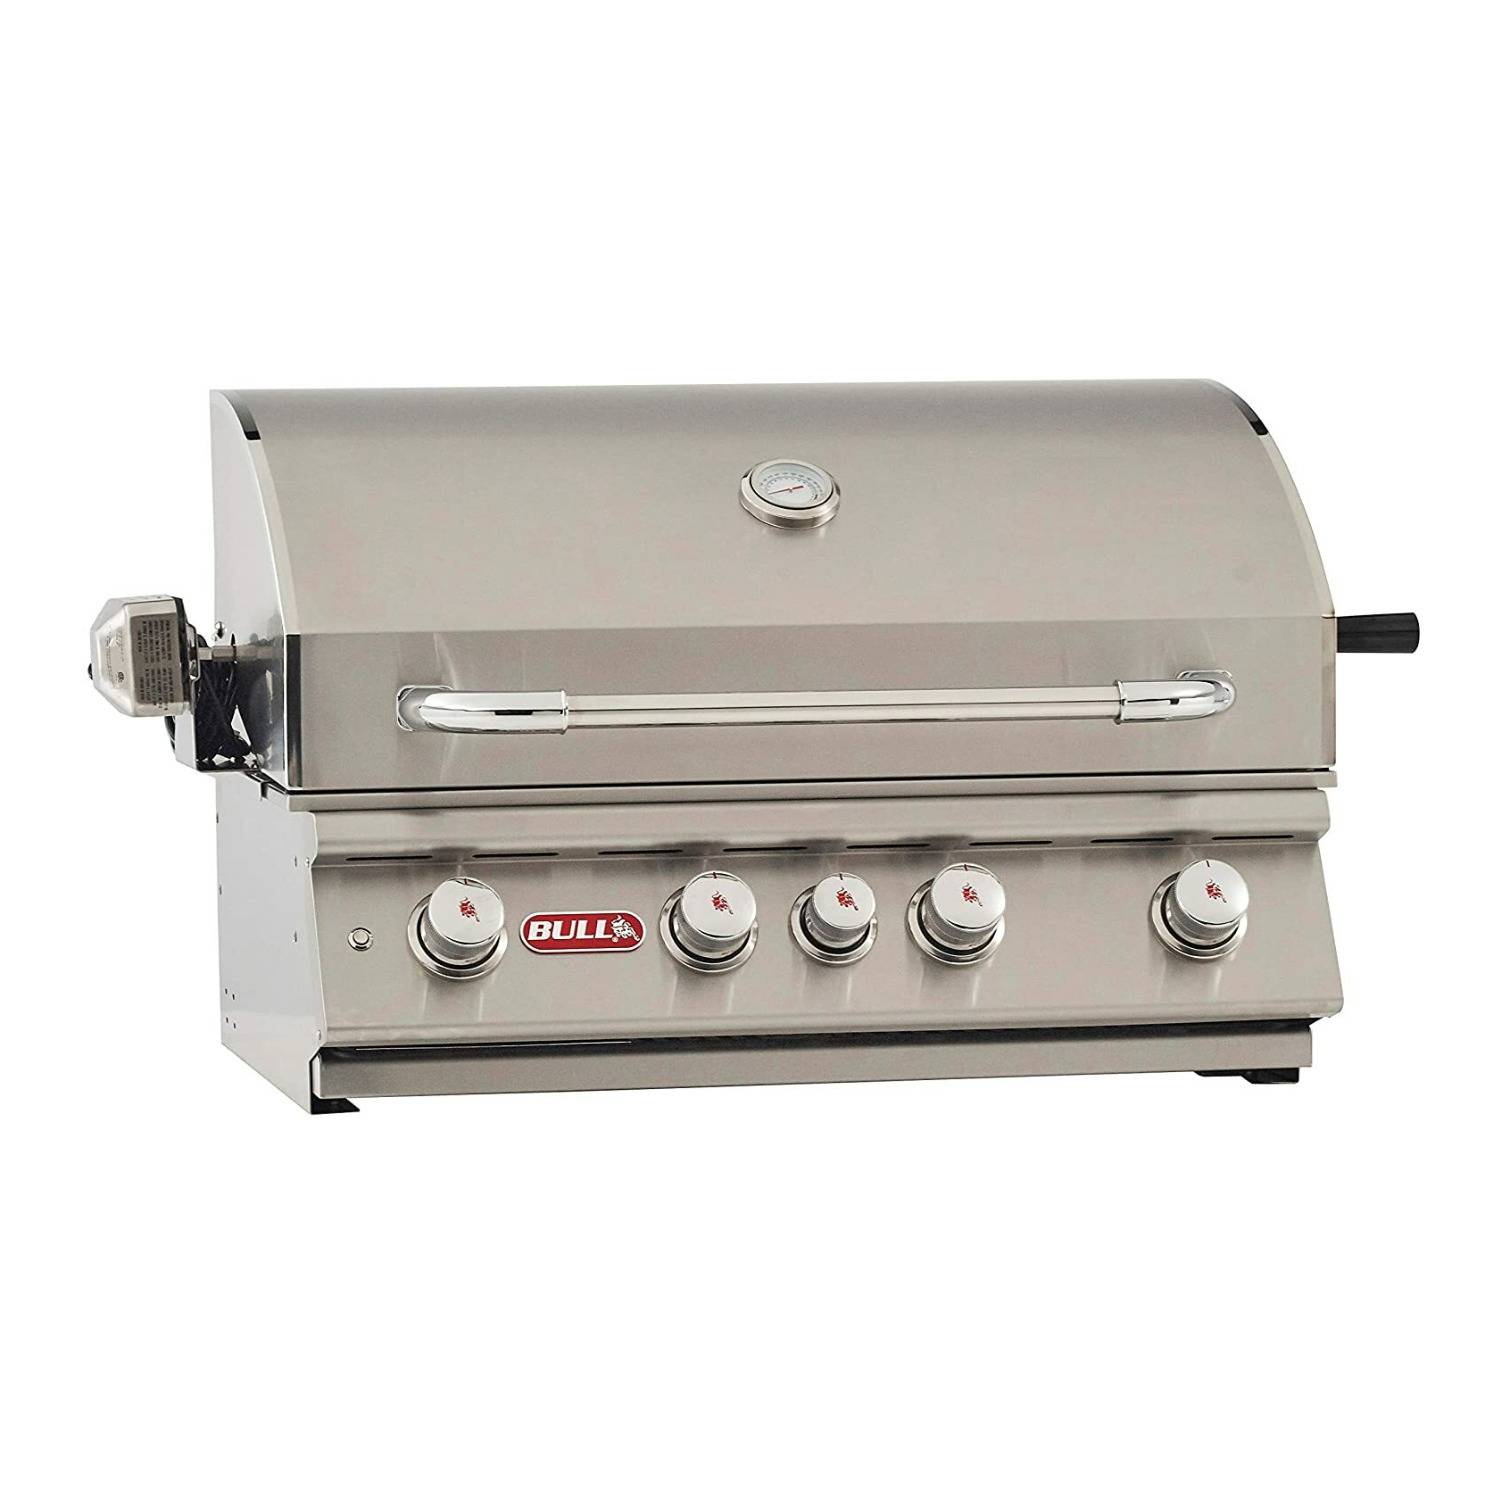 Bull BBQ Angus 30-Inch Stainless Steel Drop-In Grill (Liquid Propane)